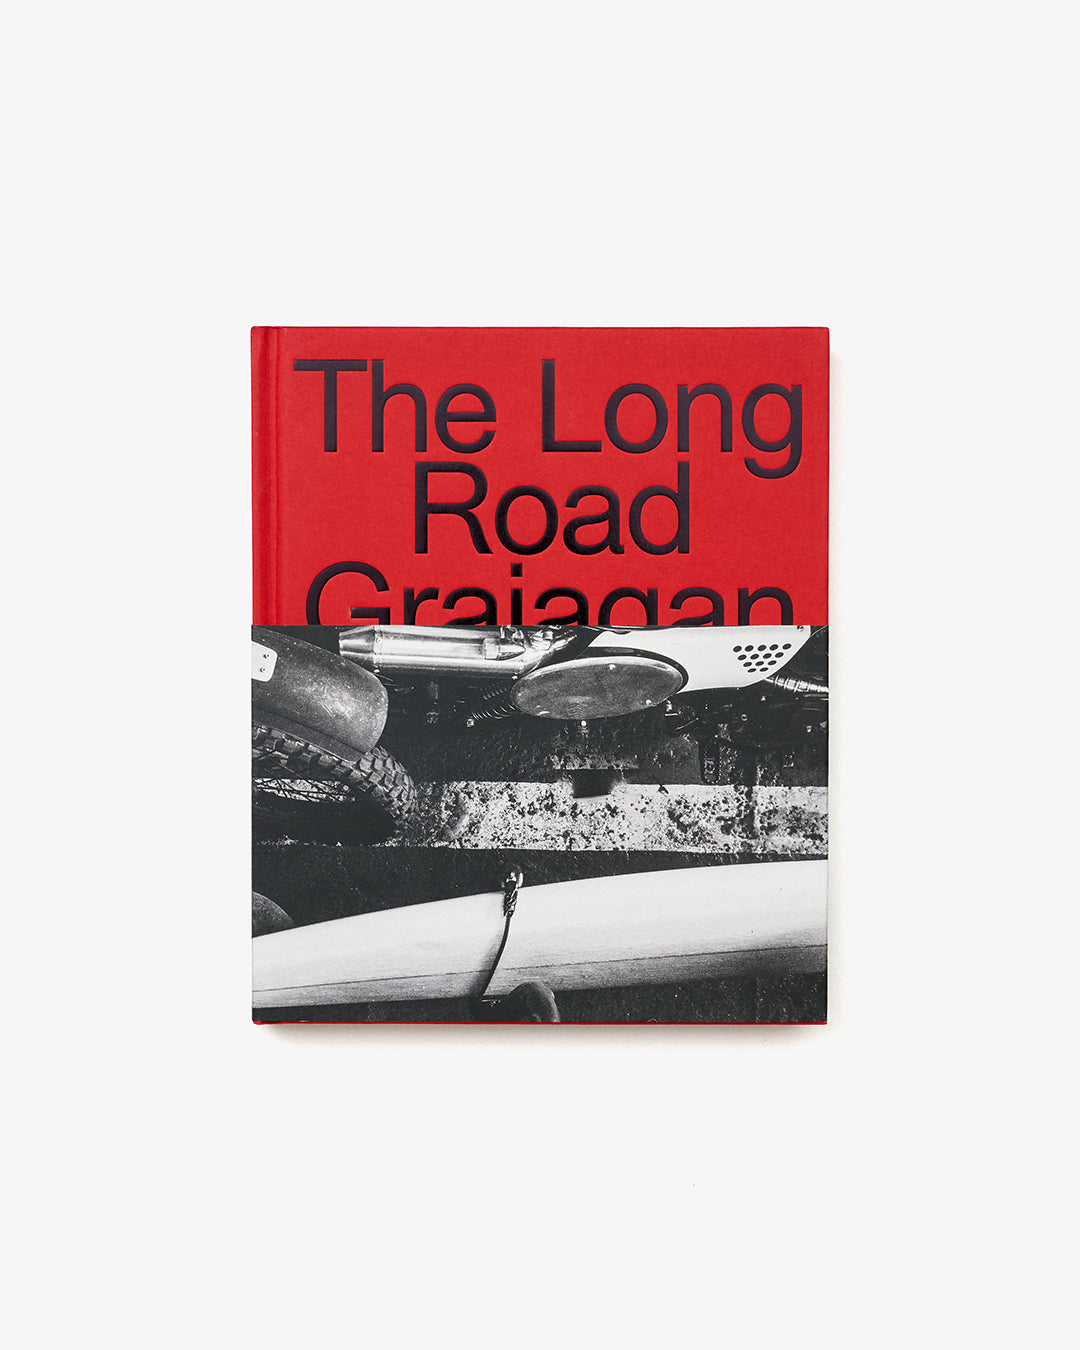 THE LONG ROAD TO GRAJAGAN BOOK